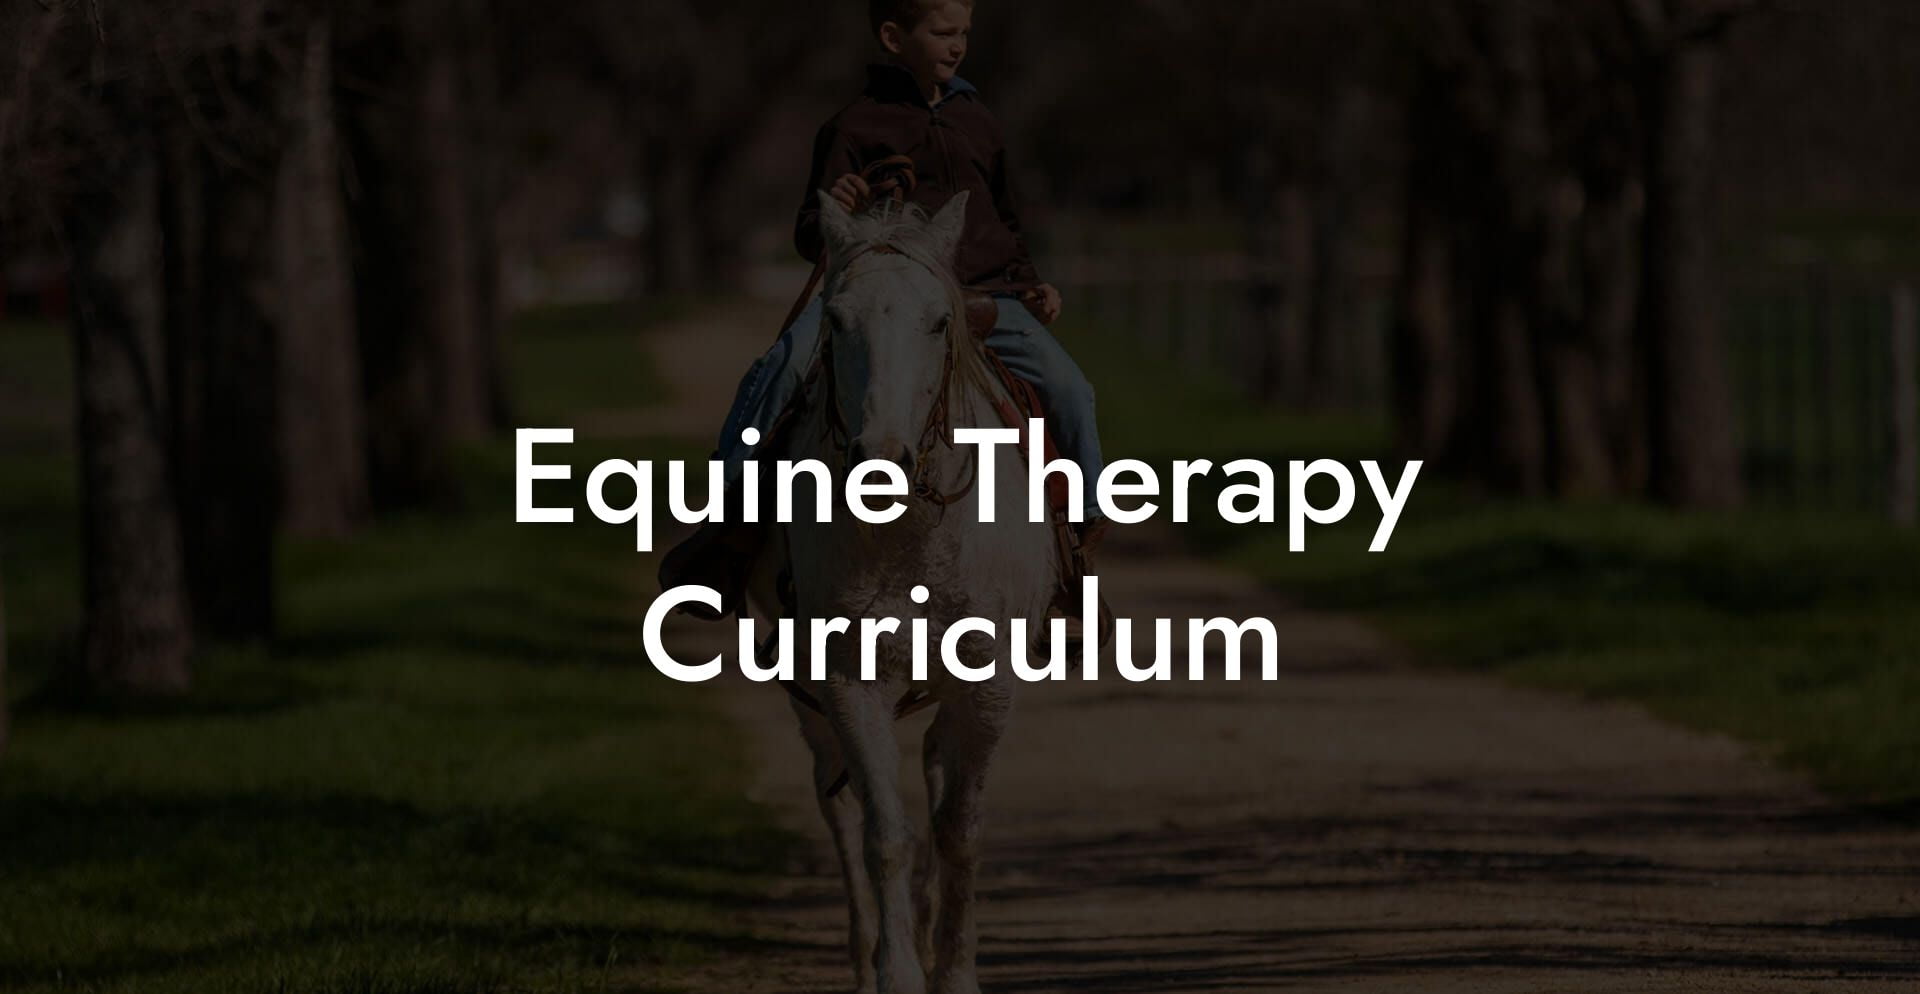 Equine Therapy Curriculum